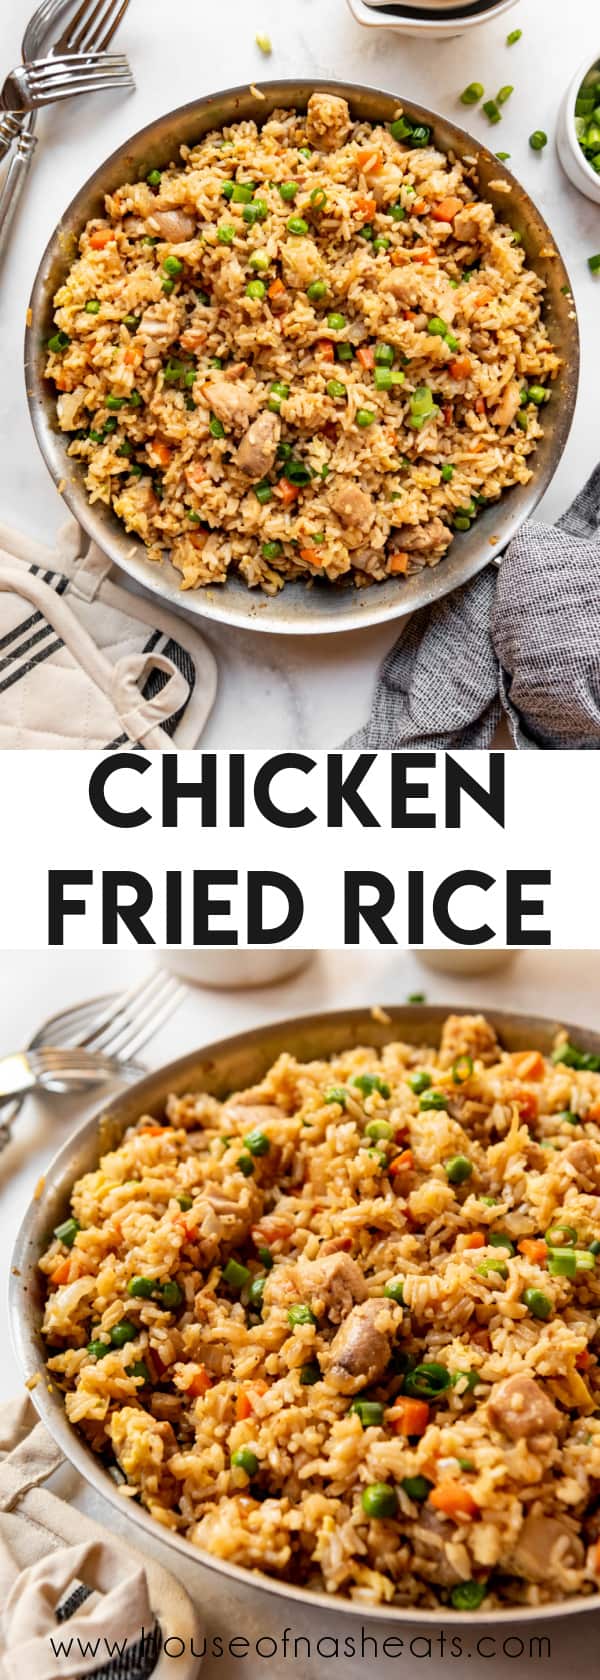 A collage of images of chicken fried rice with text overlay.